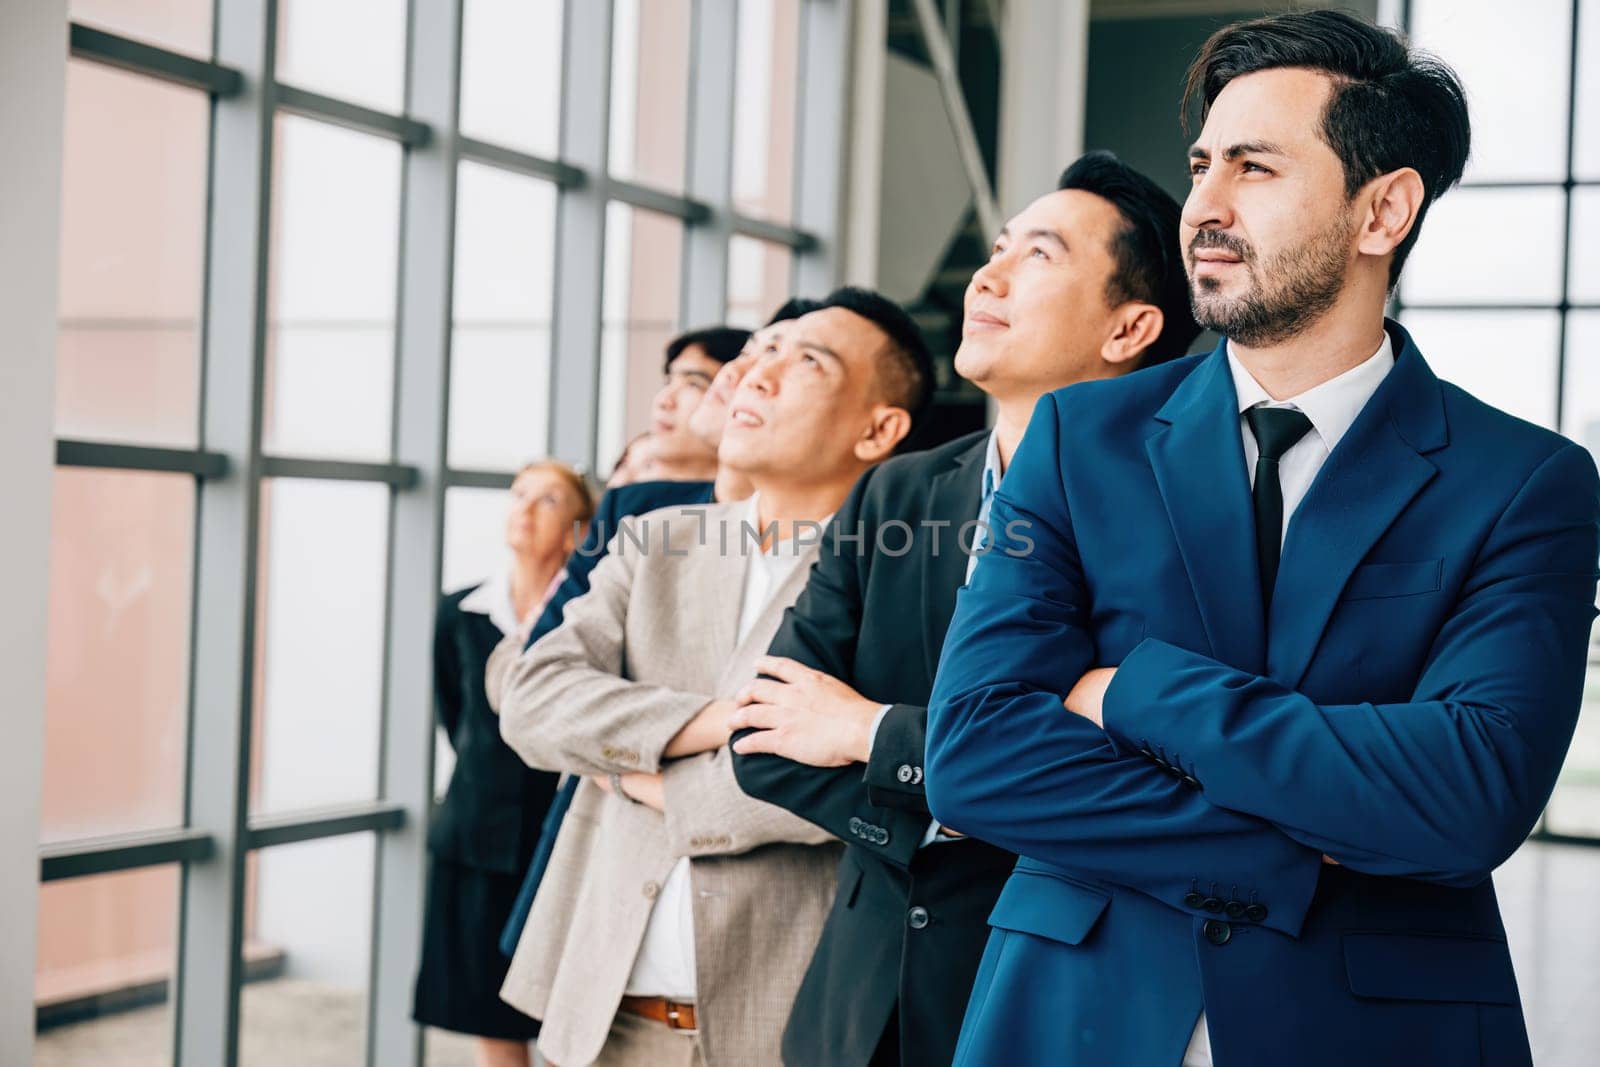 Confidence and success define group portrait of young businesspeople and businessman in office standing with crossed arms. They exemplify strong leadership, teamwork and spirit of a thriving startup. by Sorapop